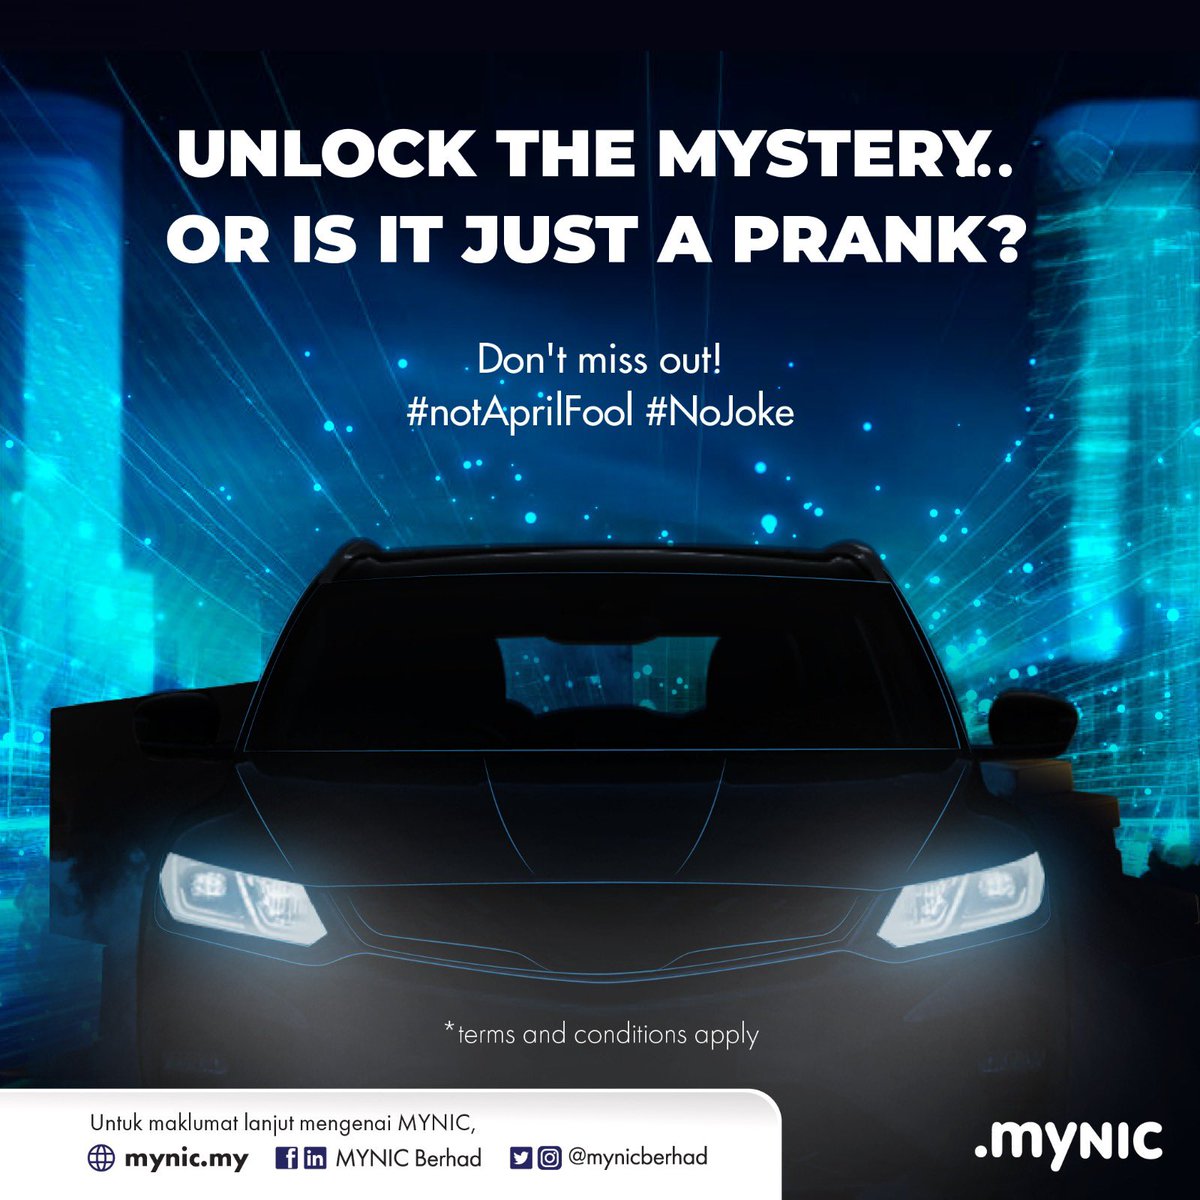 Are you ready to unravel the Mystery? 🕵️‍♂️
Get ready to join us on an adventure like no other!
Stay tuned for more updates! ⏱️
#StayTuned #UnlockTheMystery #MYNIC #KementerianDigital #MalaysiaDigital #MalaysiaMADANI #DigitalNation #JomDigital #SayaDigital #domainname #my